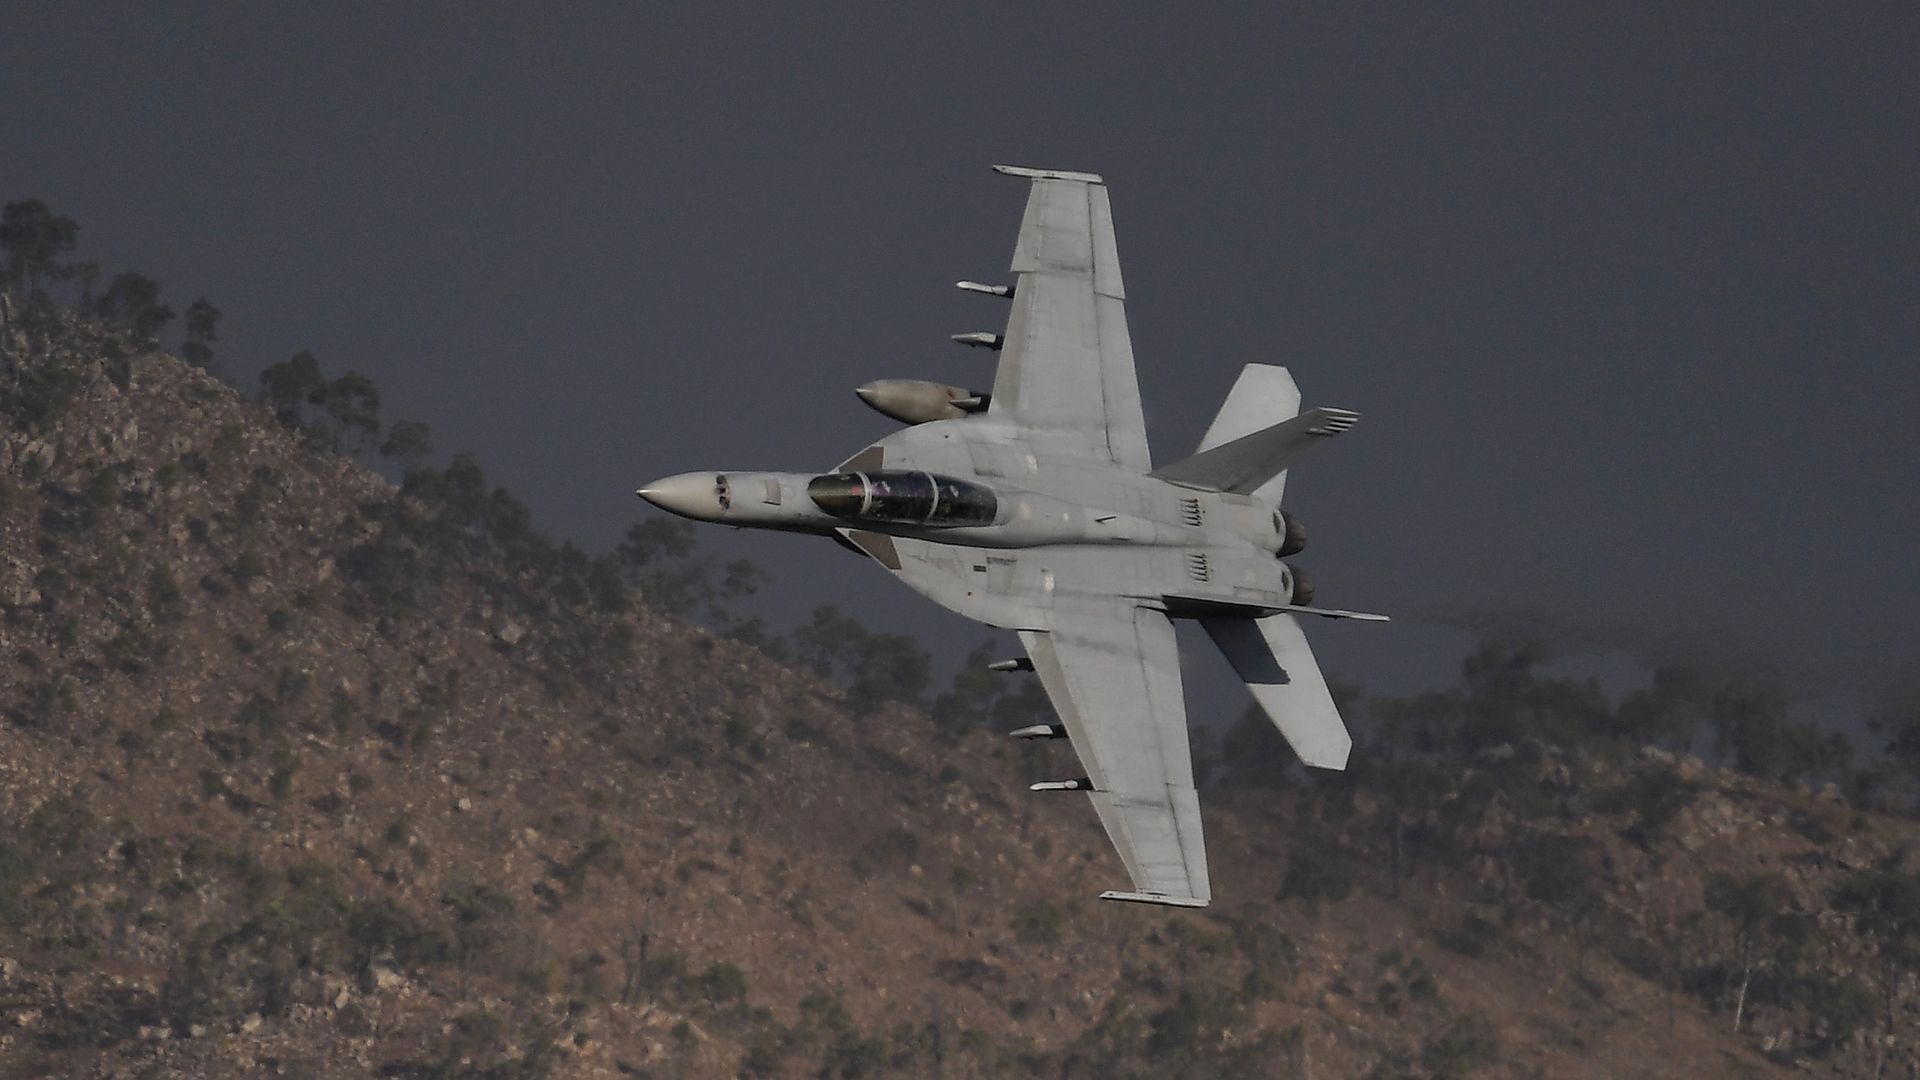 A RAAF (Royal Australian Air Force) F/A-18F Super Hornet conducts a 'show of force' as part of Exercise Nigrum Pugio on October 14, 2020 in Townsville, Australia. 